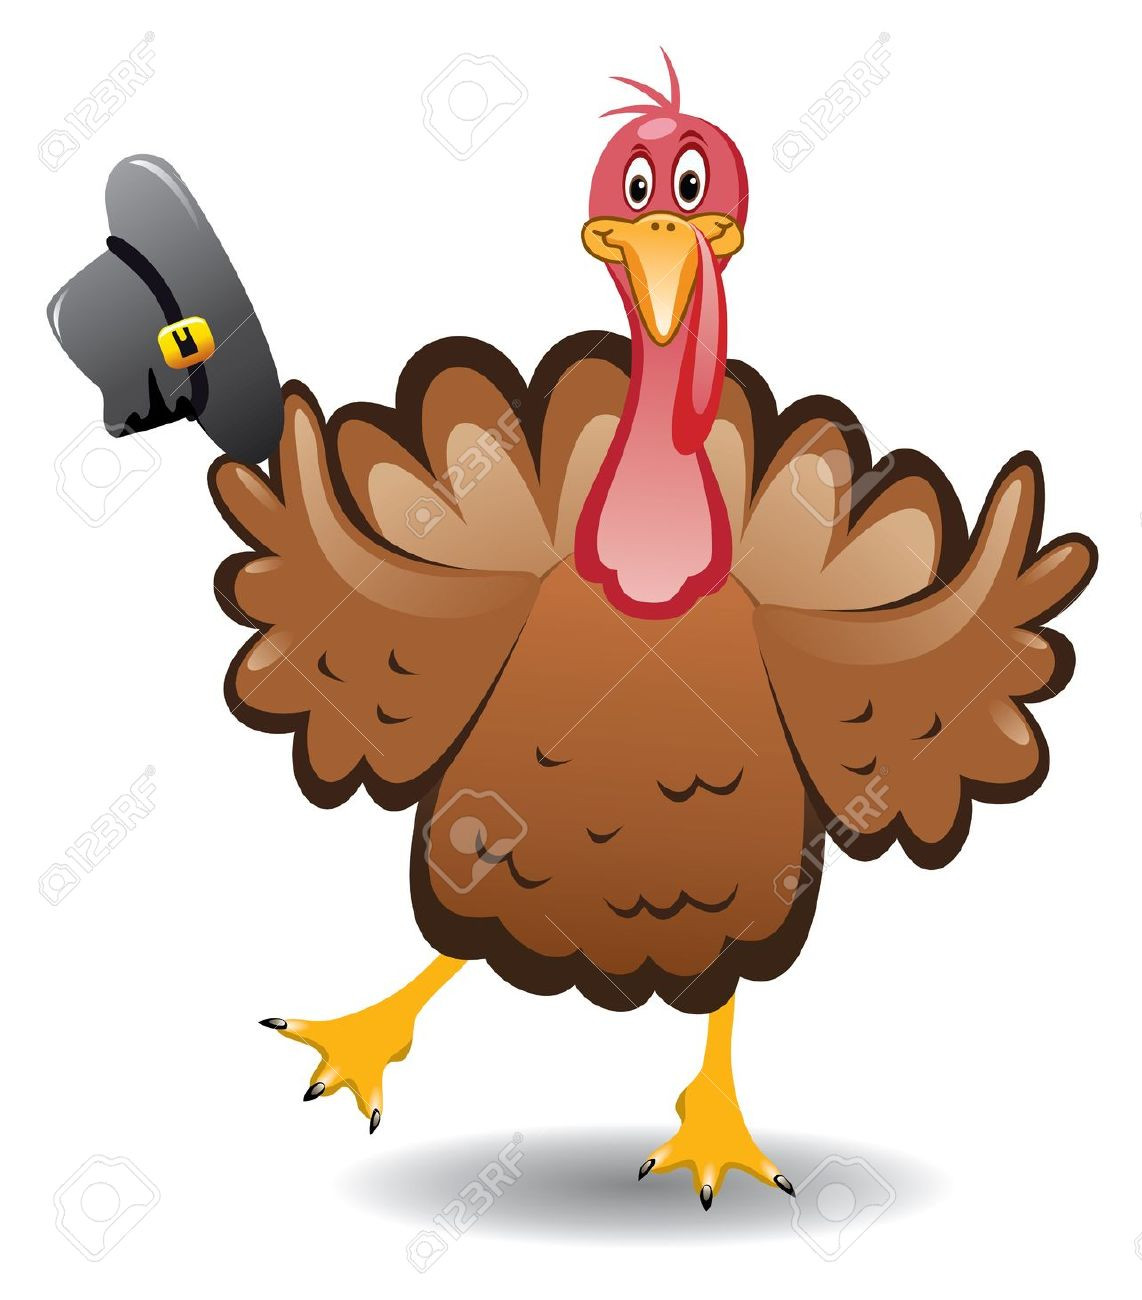 Thanksgiving Turkey Clipart
 Pavo clipart Clipground